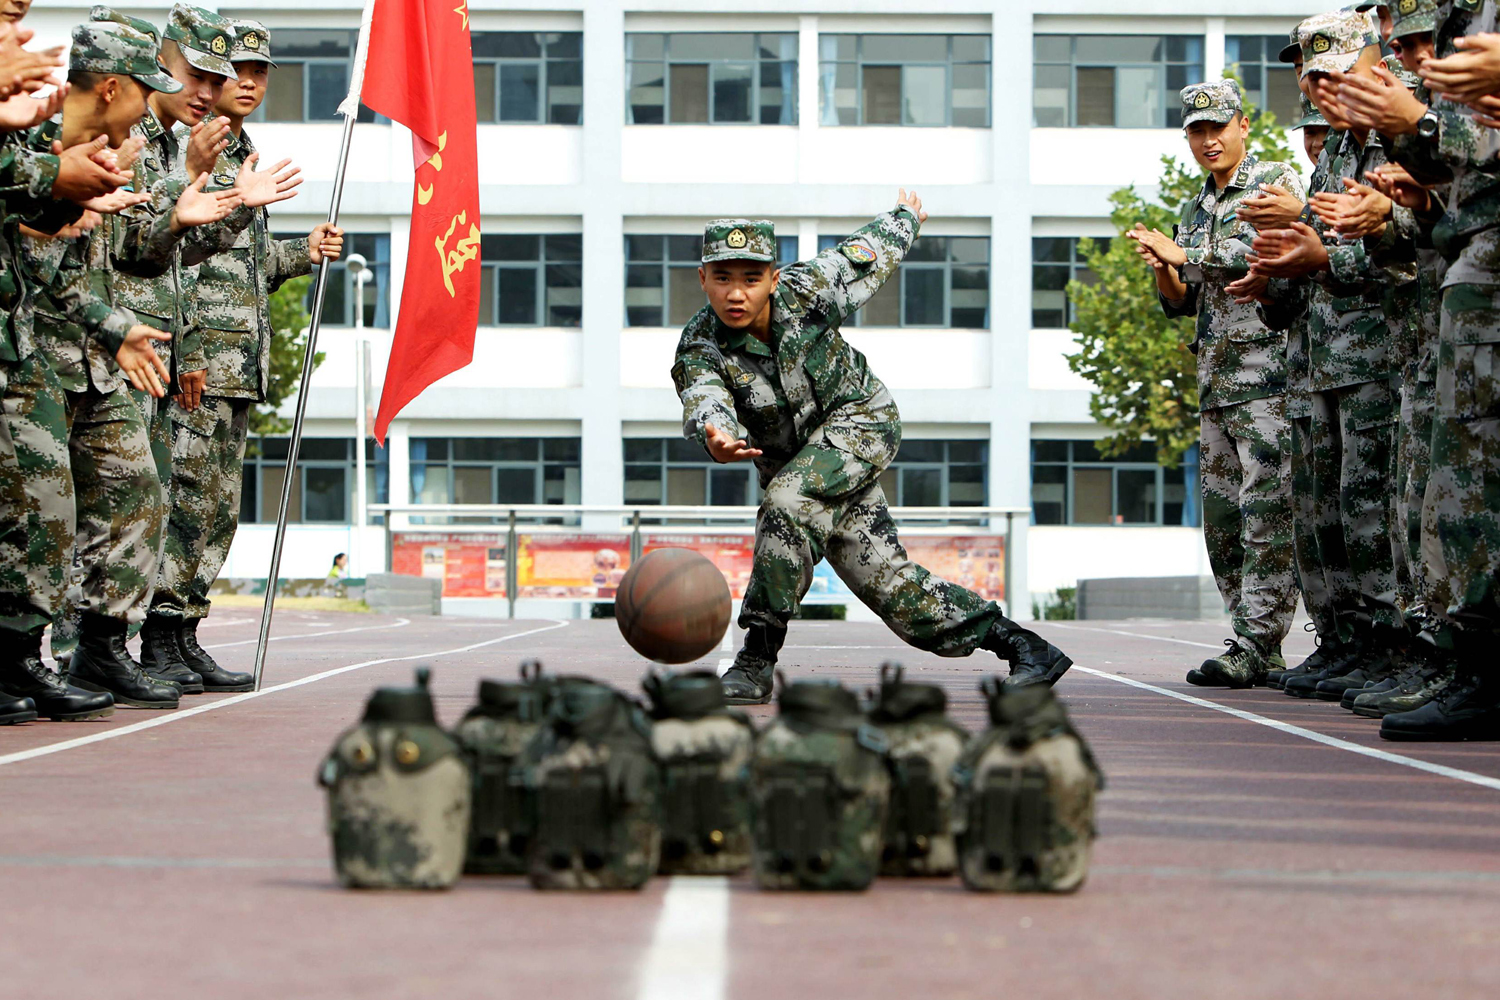 Soldiers of Chinese People's Liberation Army "bowl" during China's seven-day National Day holiday in Jinan